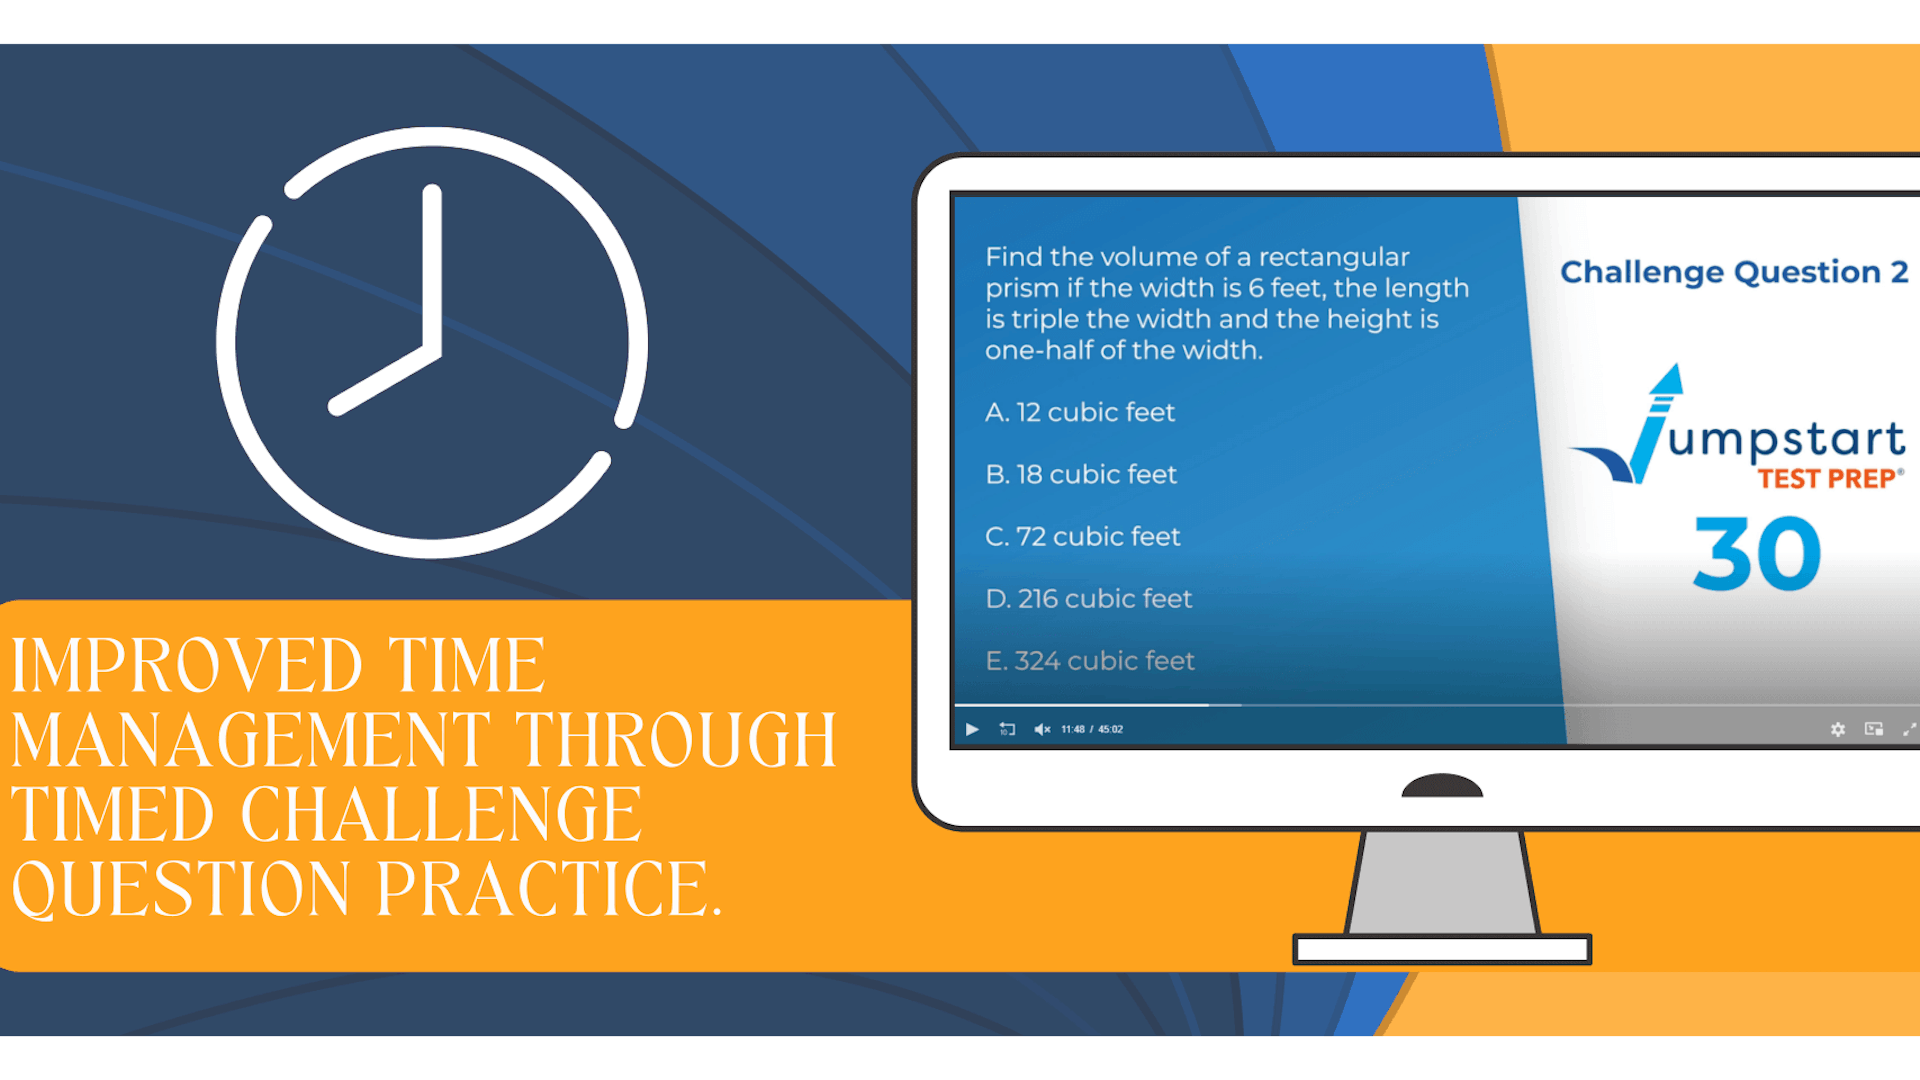 Improved time management through timed challenge question practice